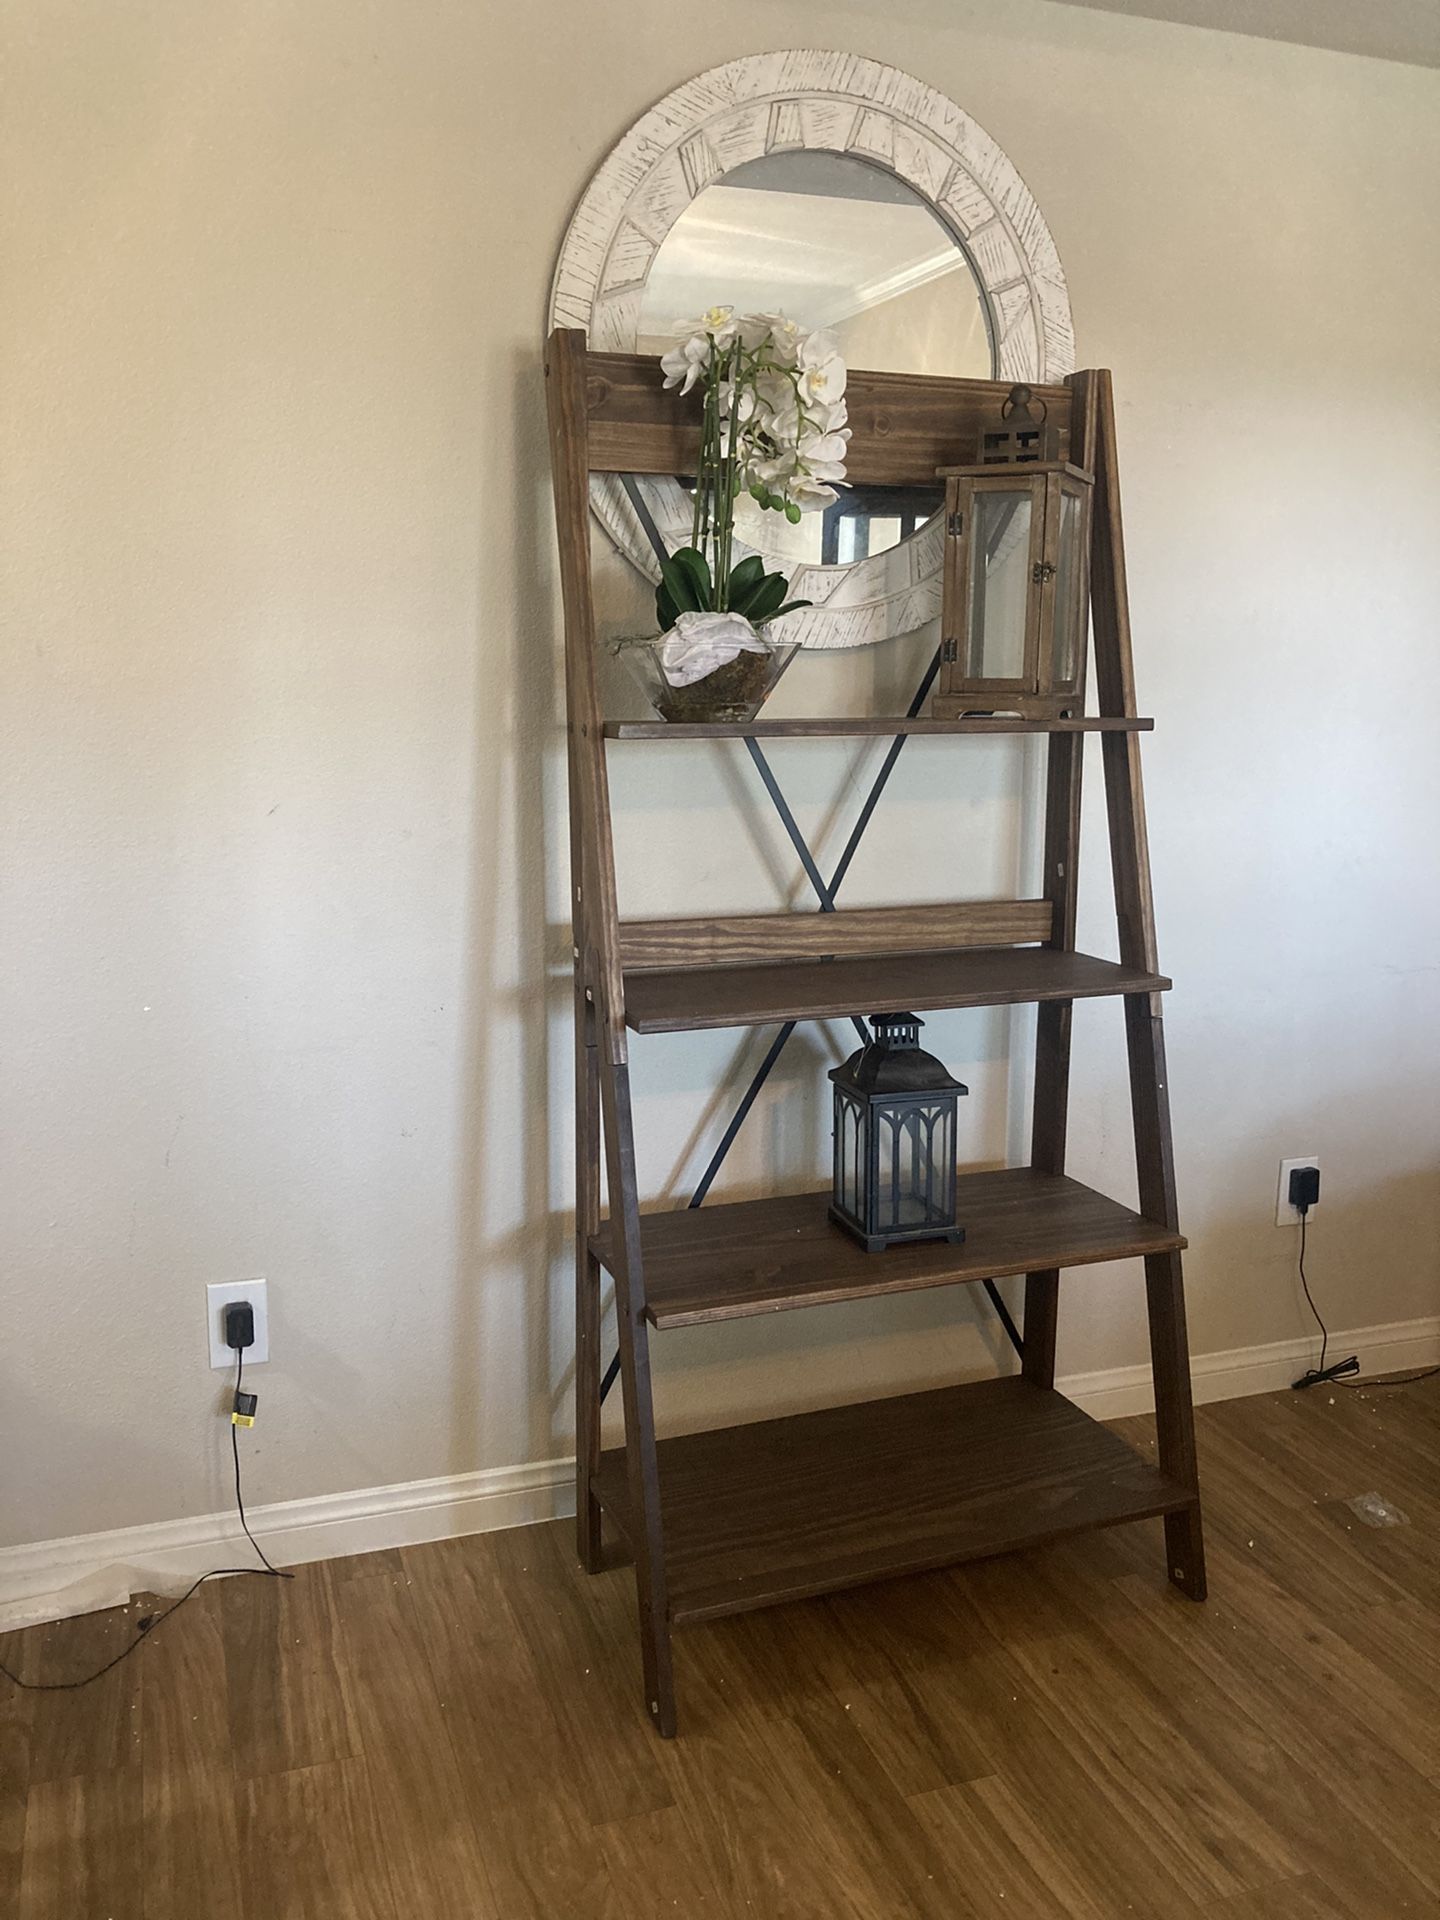 New Leaning Ladder Shelf In Rustic Wood By Walker Edison 🚚 Delivery Avail 